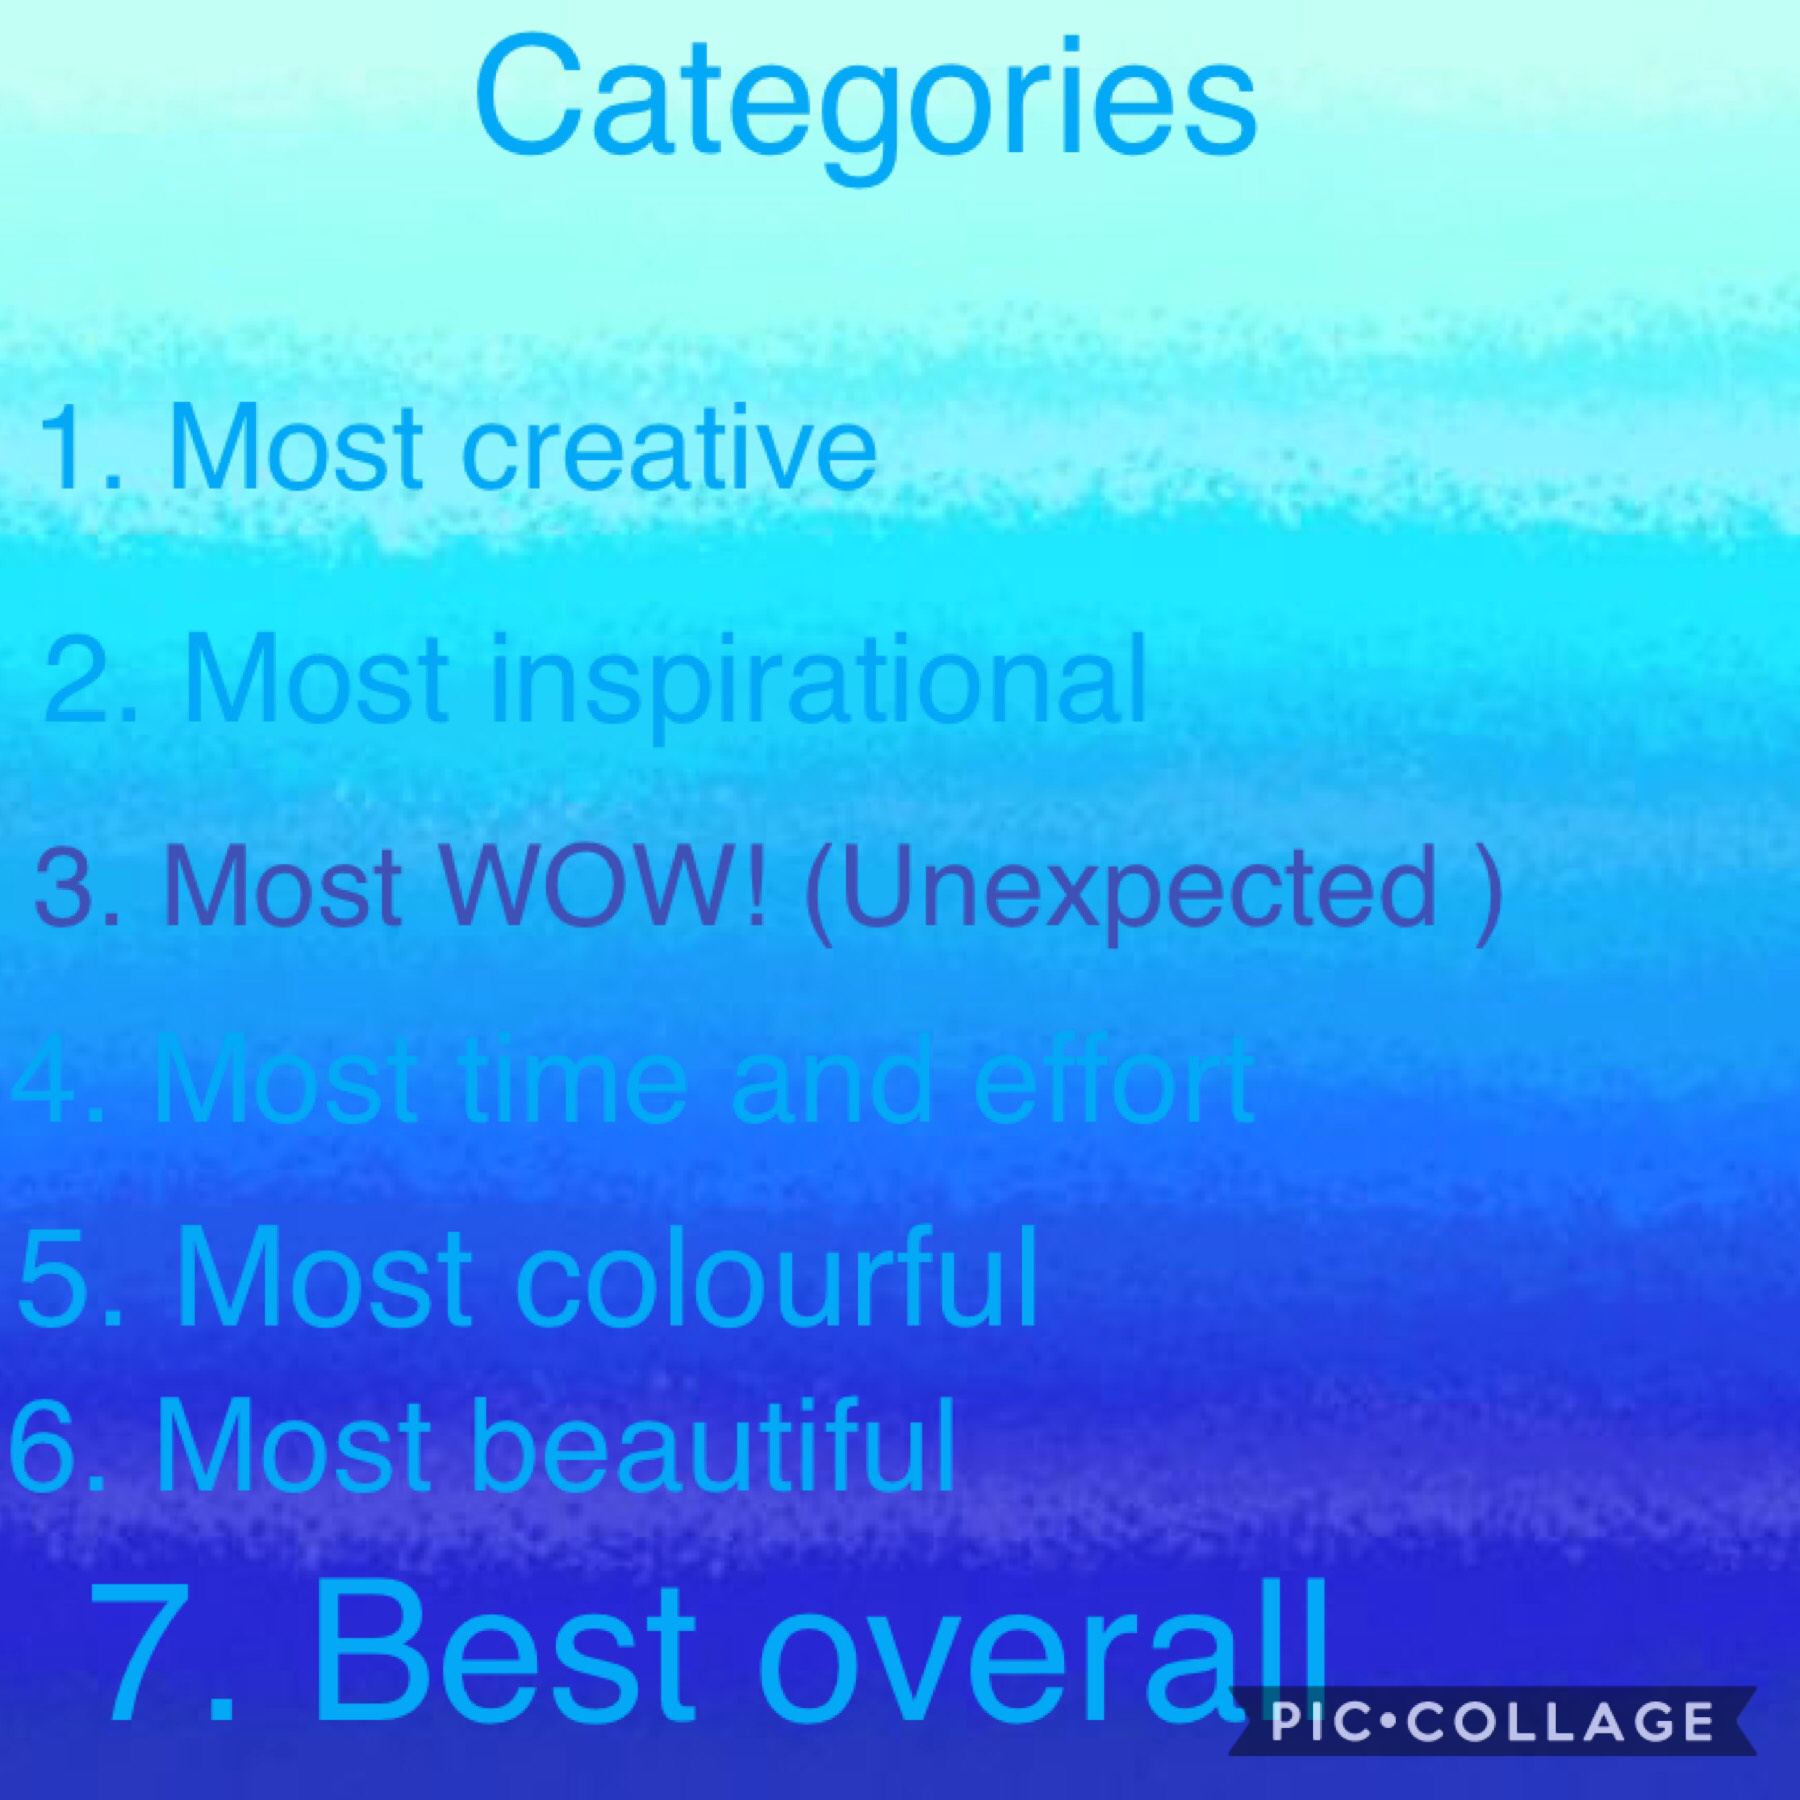 Categories for the games!